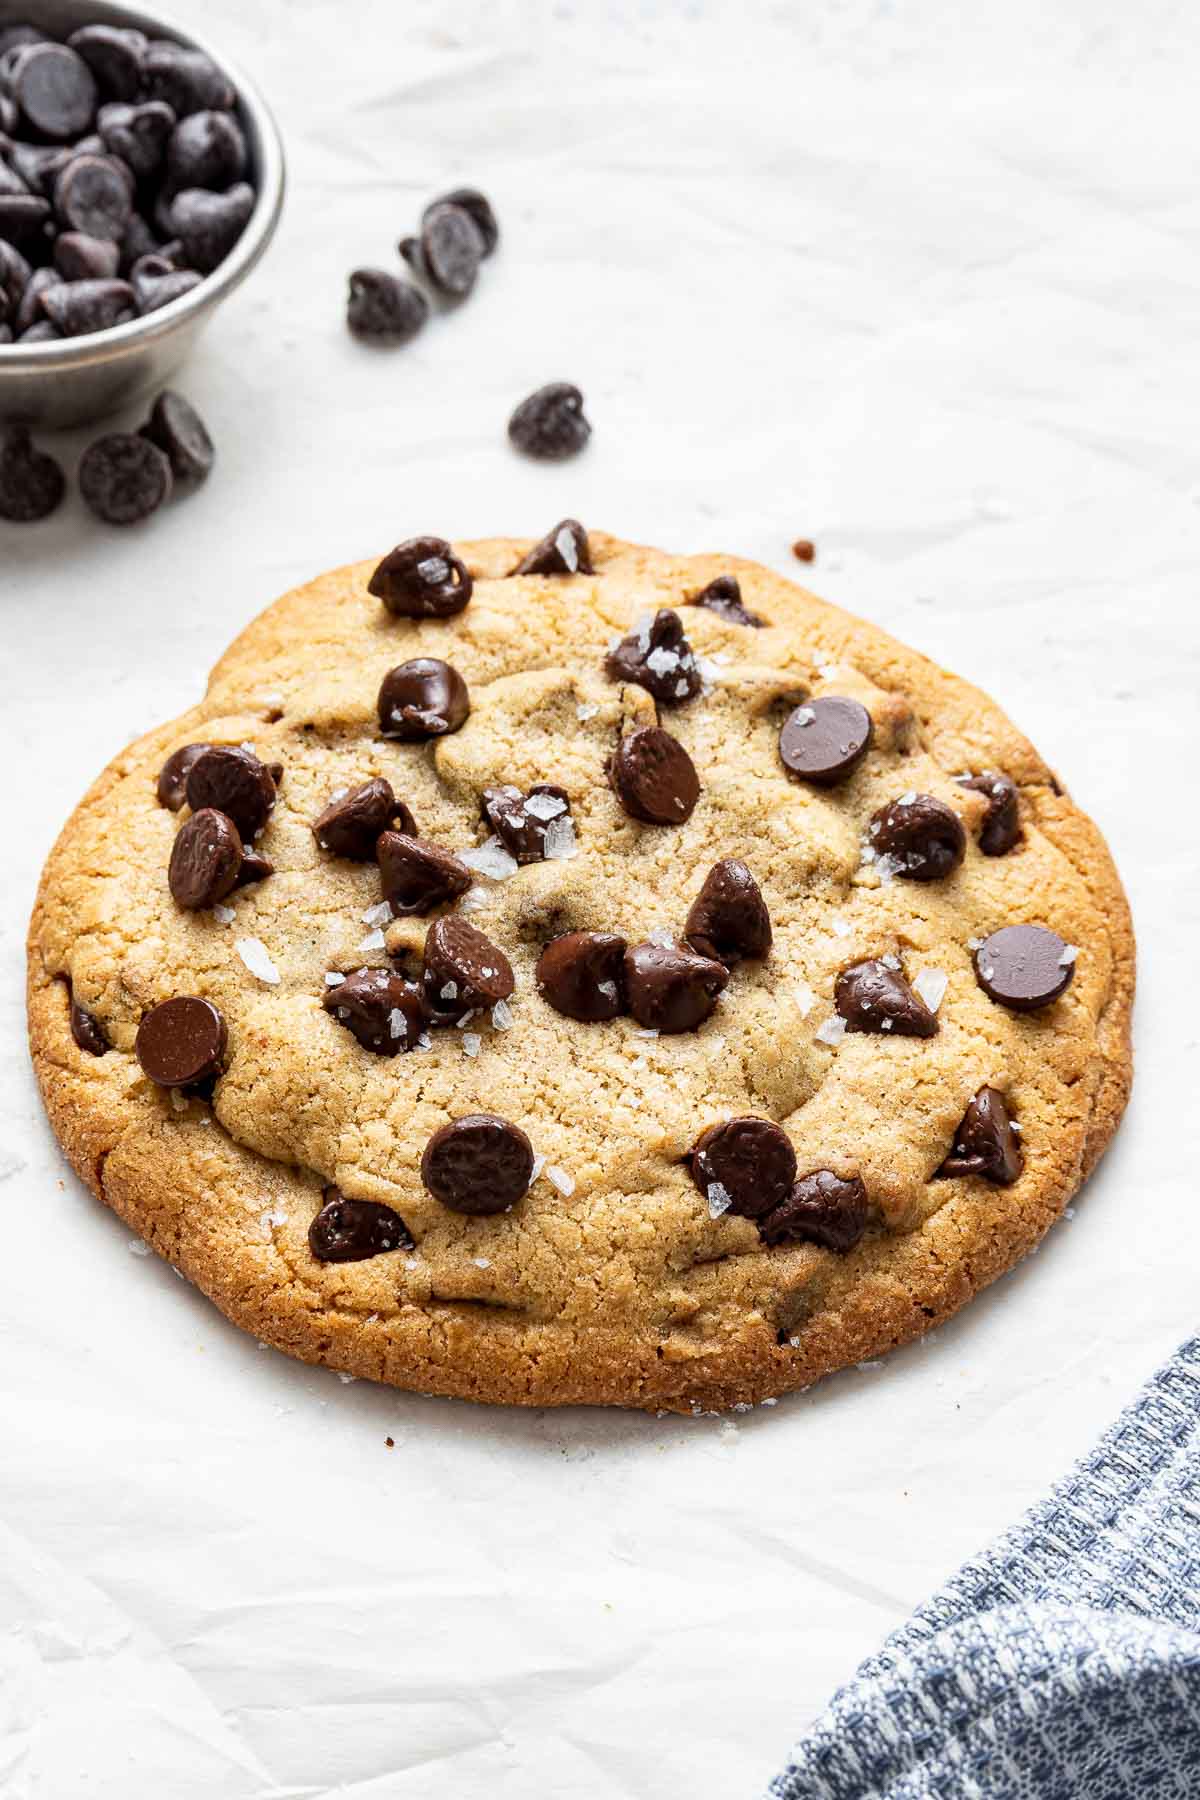 A single serve chocolate chip cookie on sheet with chocolate chips on the side.